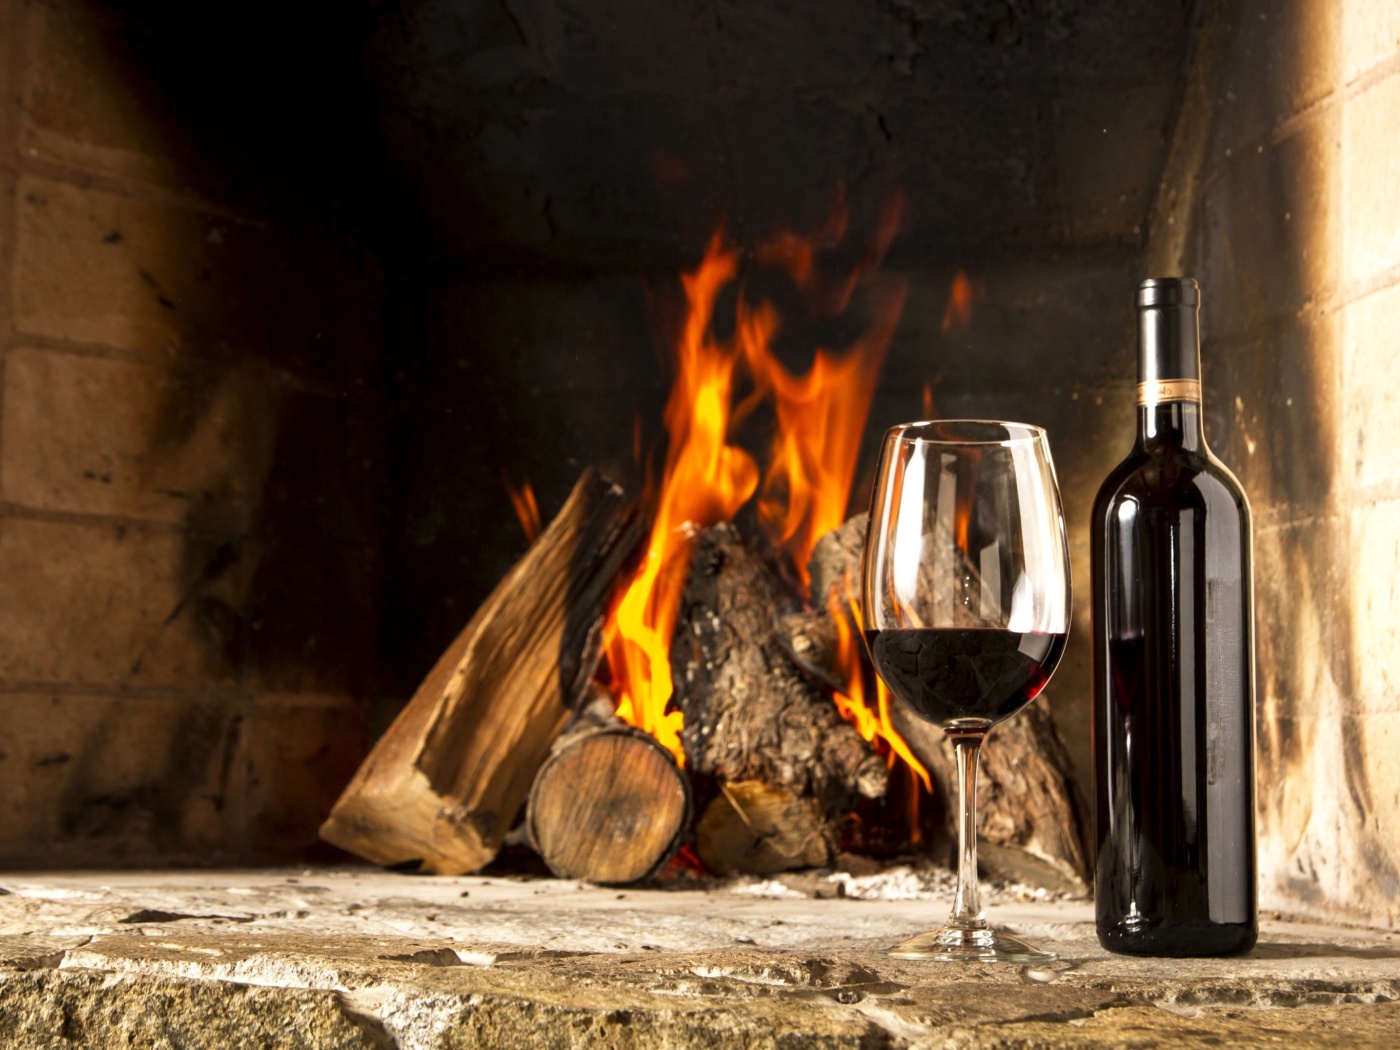 Wine and fireplace wallpaper 1400x1050